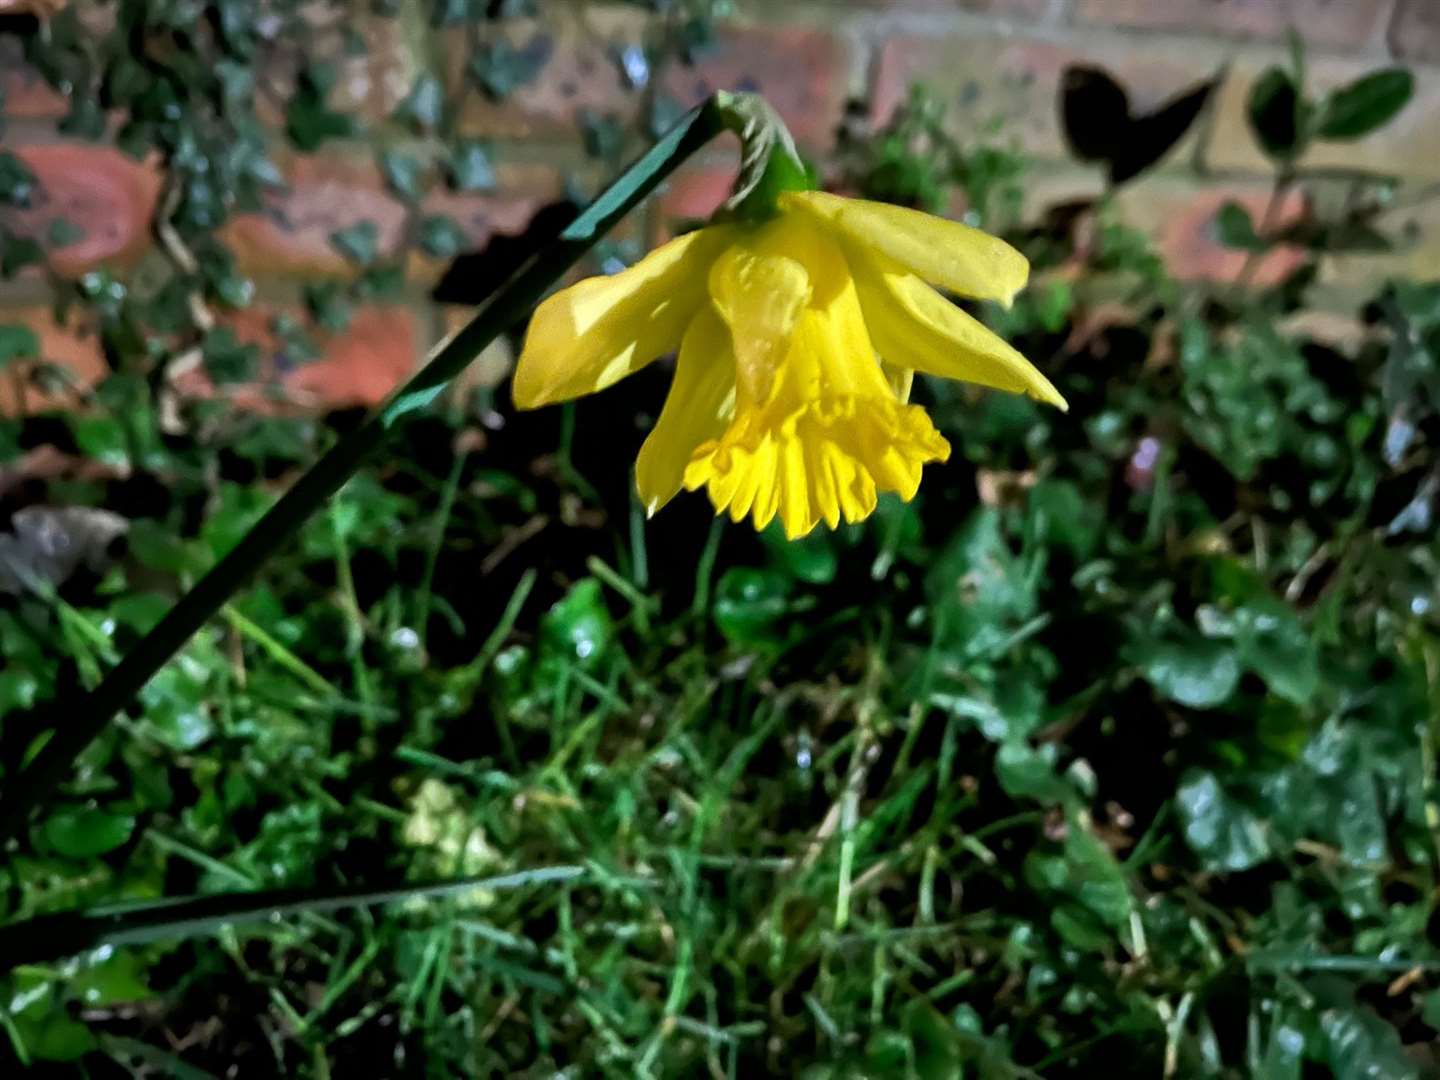 Colin Green snapped this photo of a daffodil in his Moreton Hall garden in Bury St Edmunds on Tuesday. Picture: Colin Green